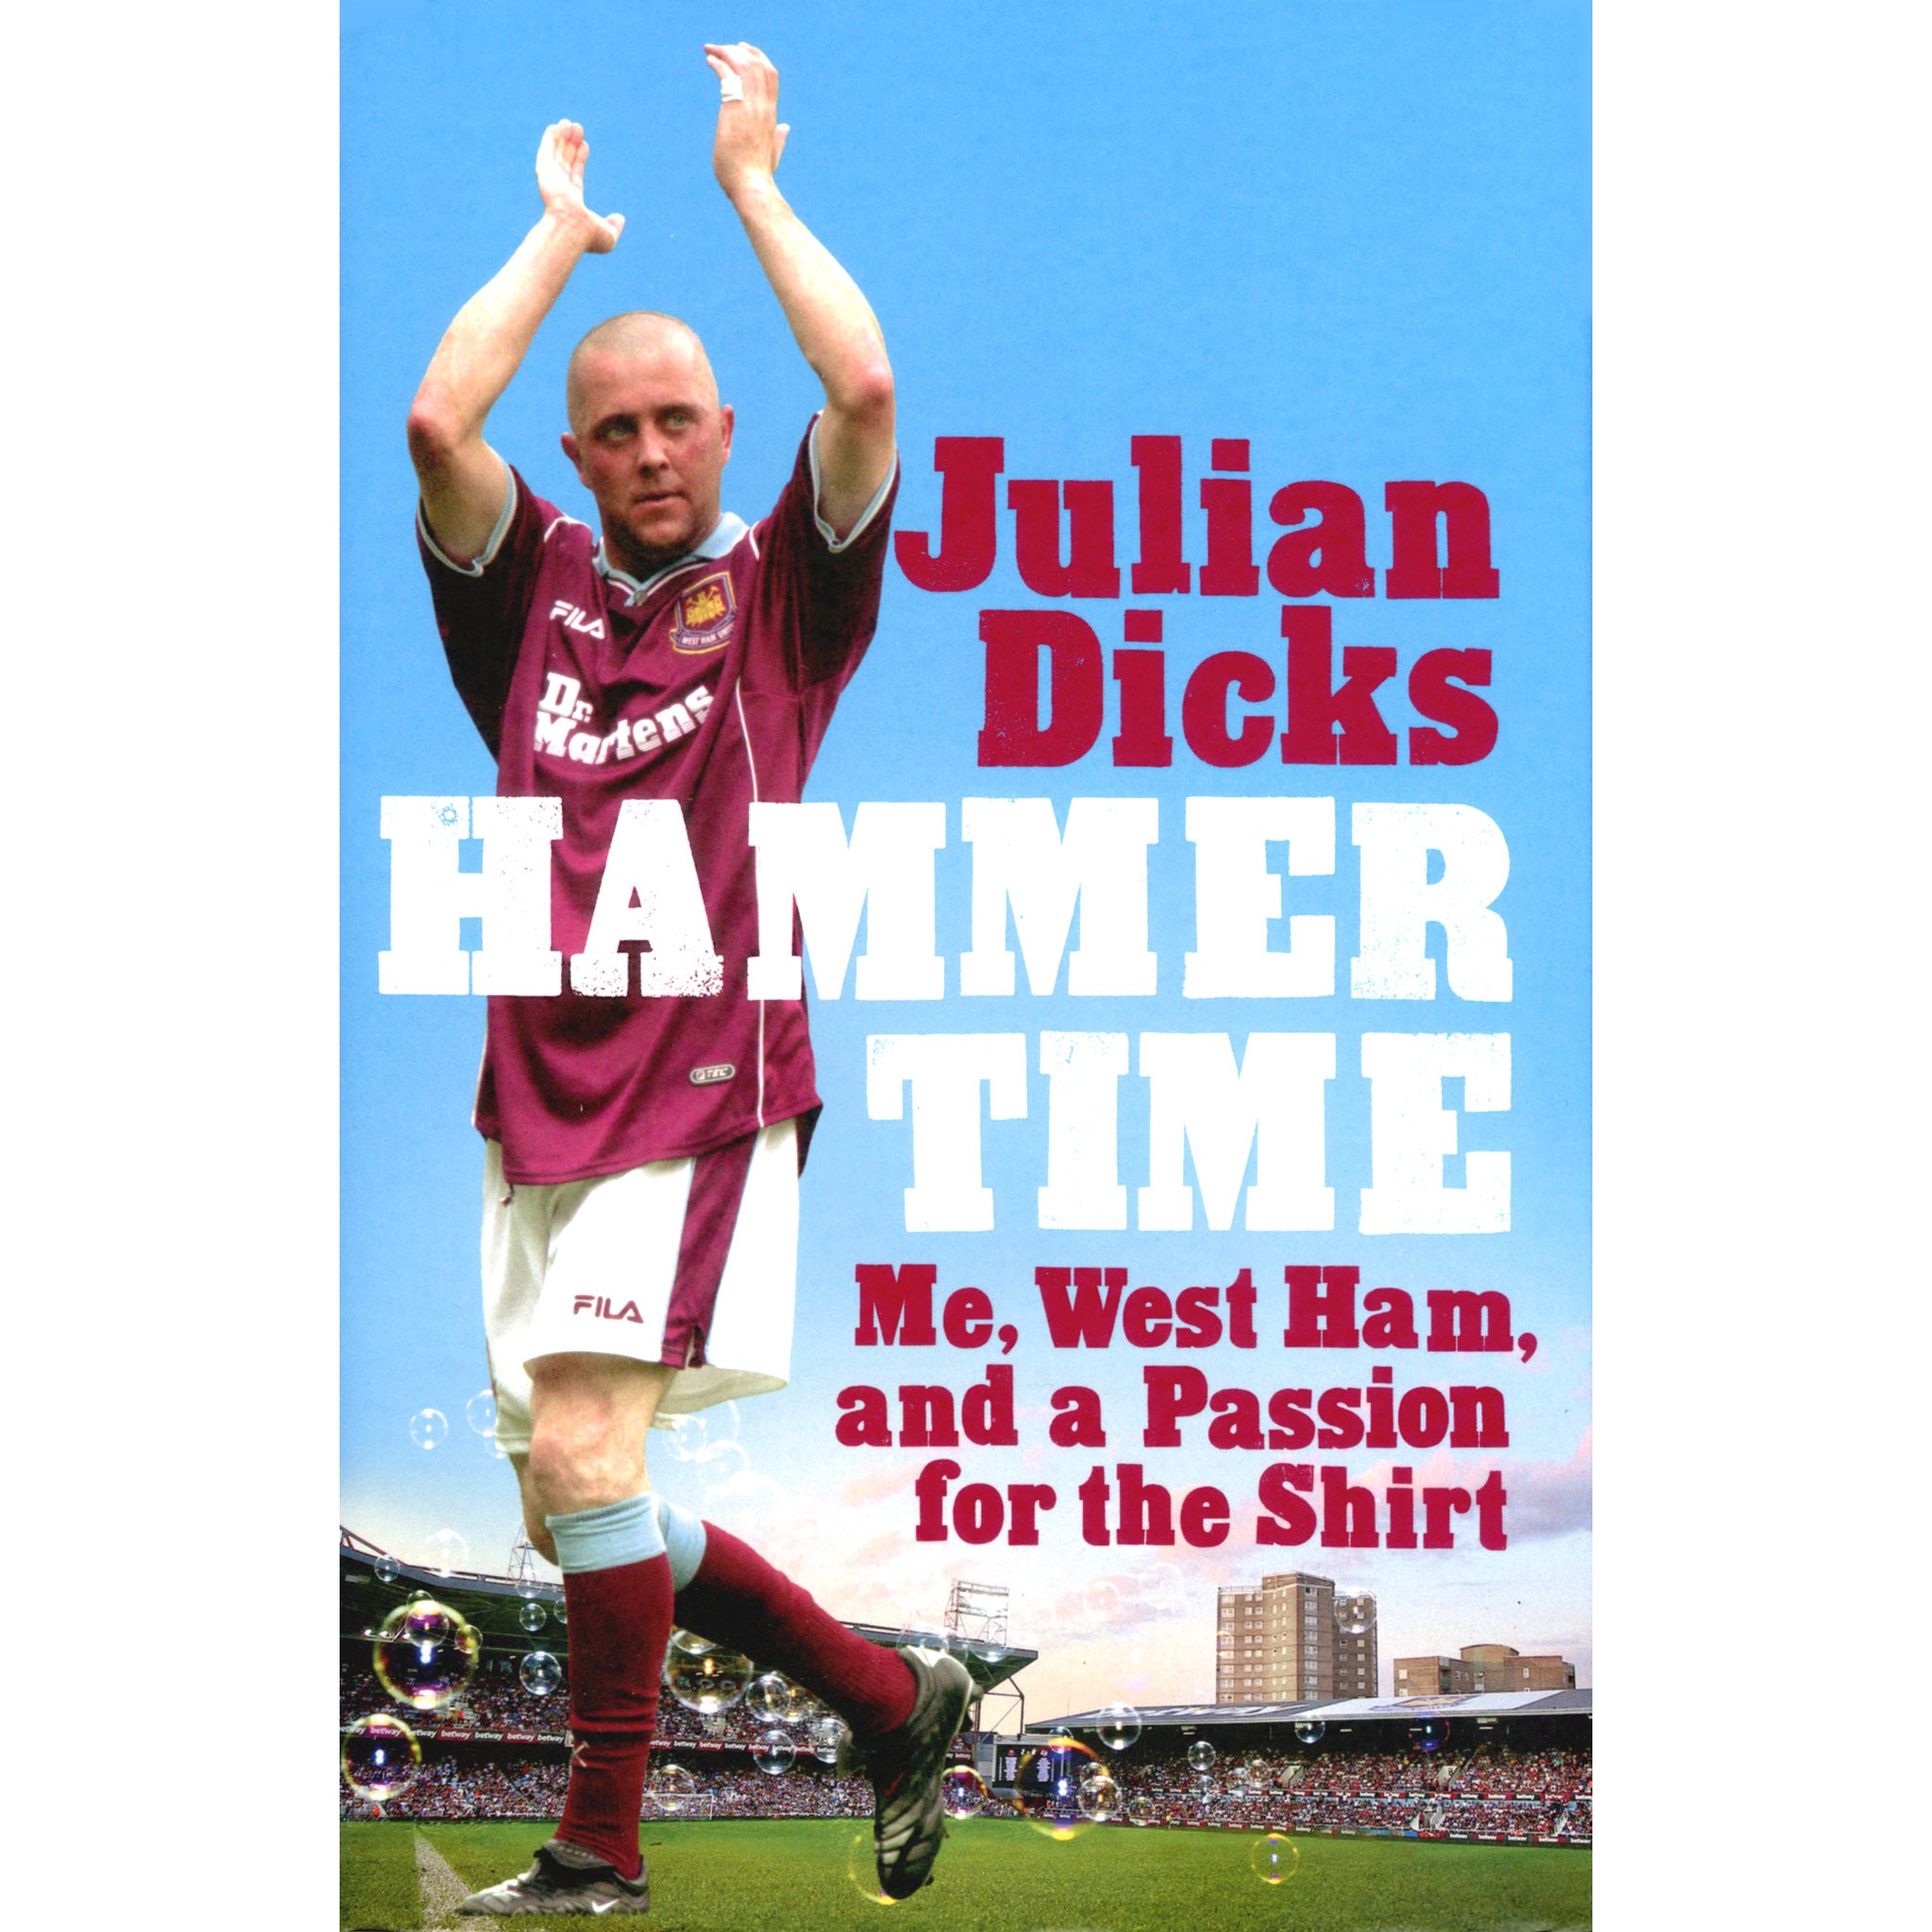 Hammer Time – Julian Dicks – Me, West Ham and a Passion for the Shirt – SIGNED